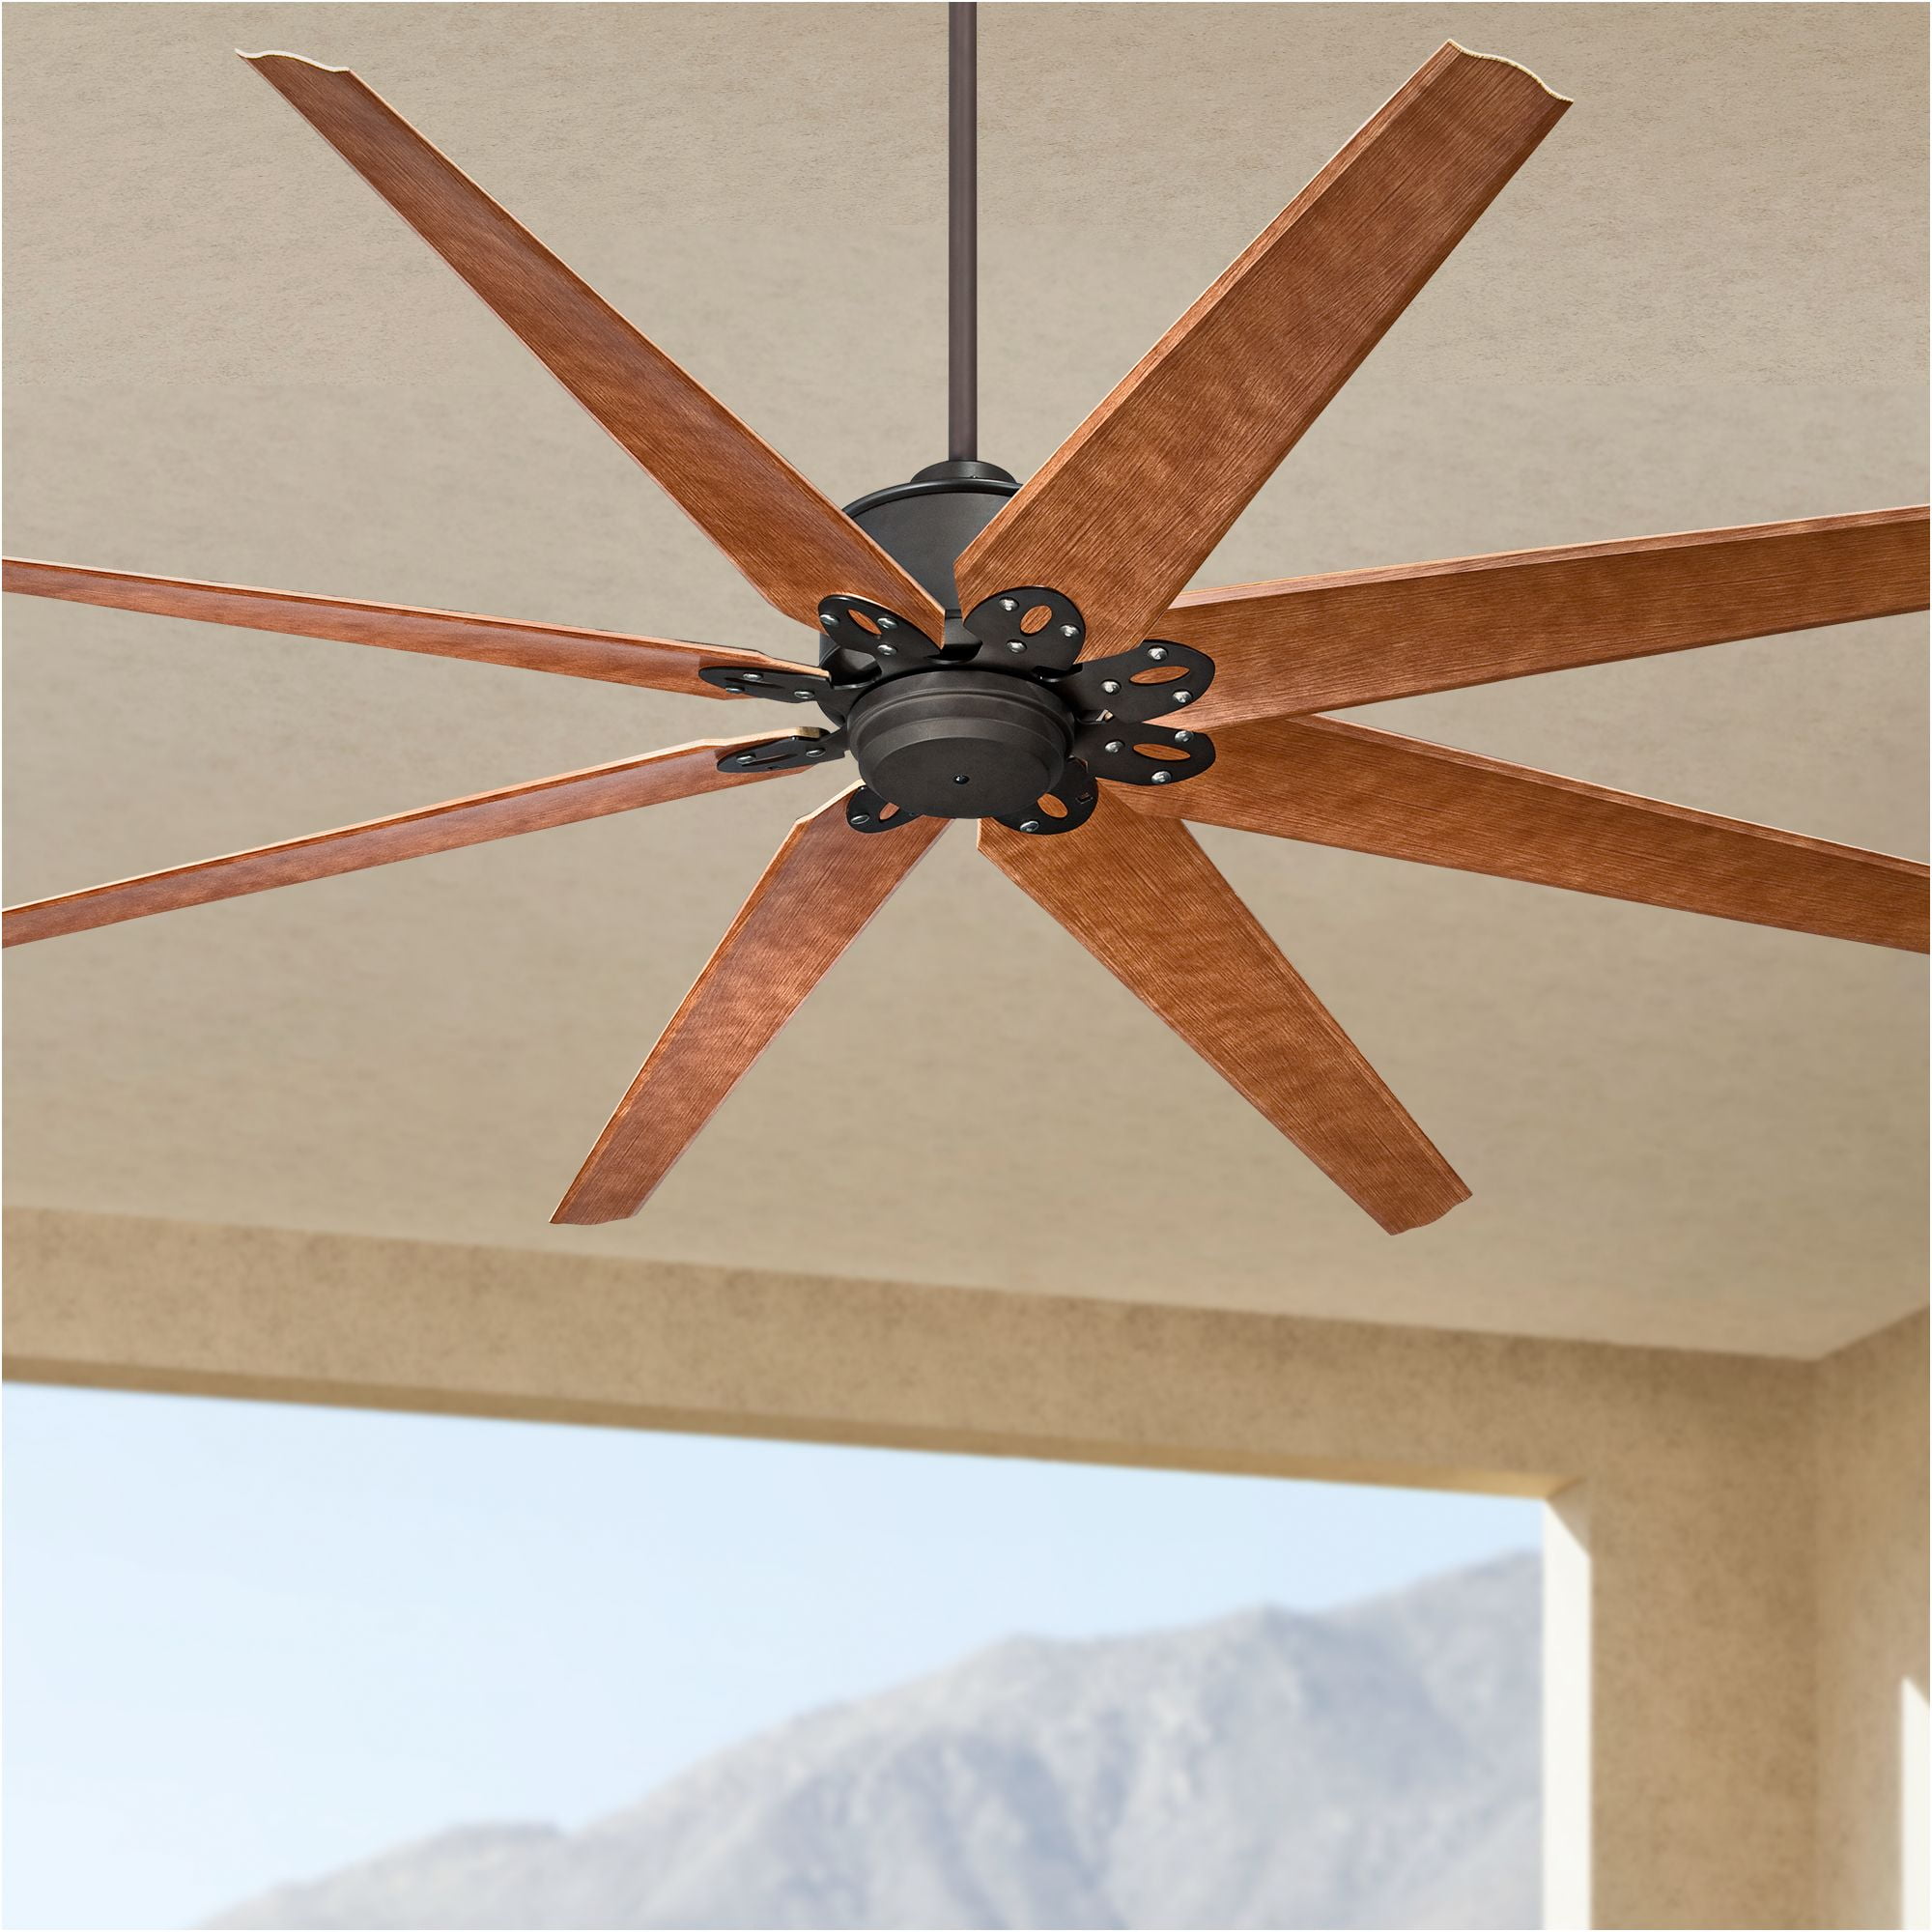 72 Casa Vieja Predator Rustic Farmhouse Indoor Outdoor Ceiling Fan With Remote Control English Bronze Cherry Damp Rated For Patio Exterior House Home Com